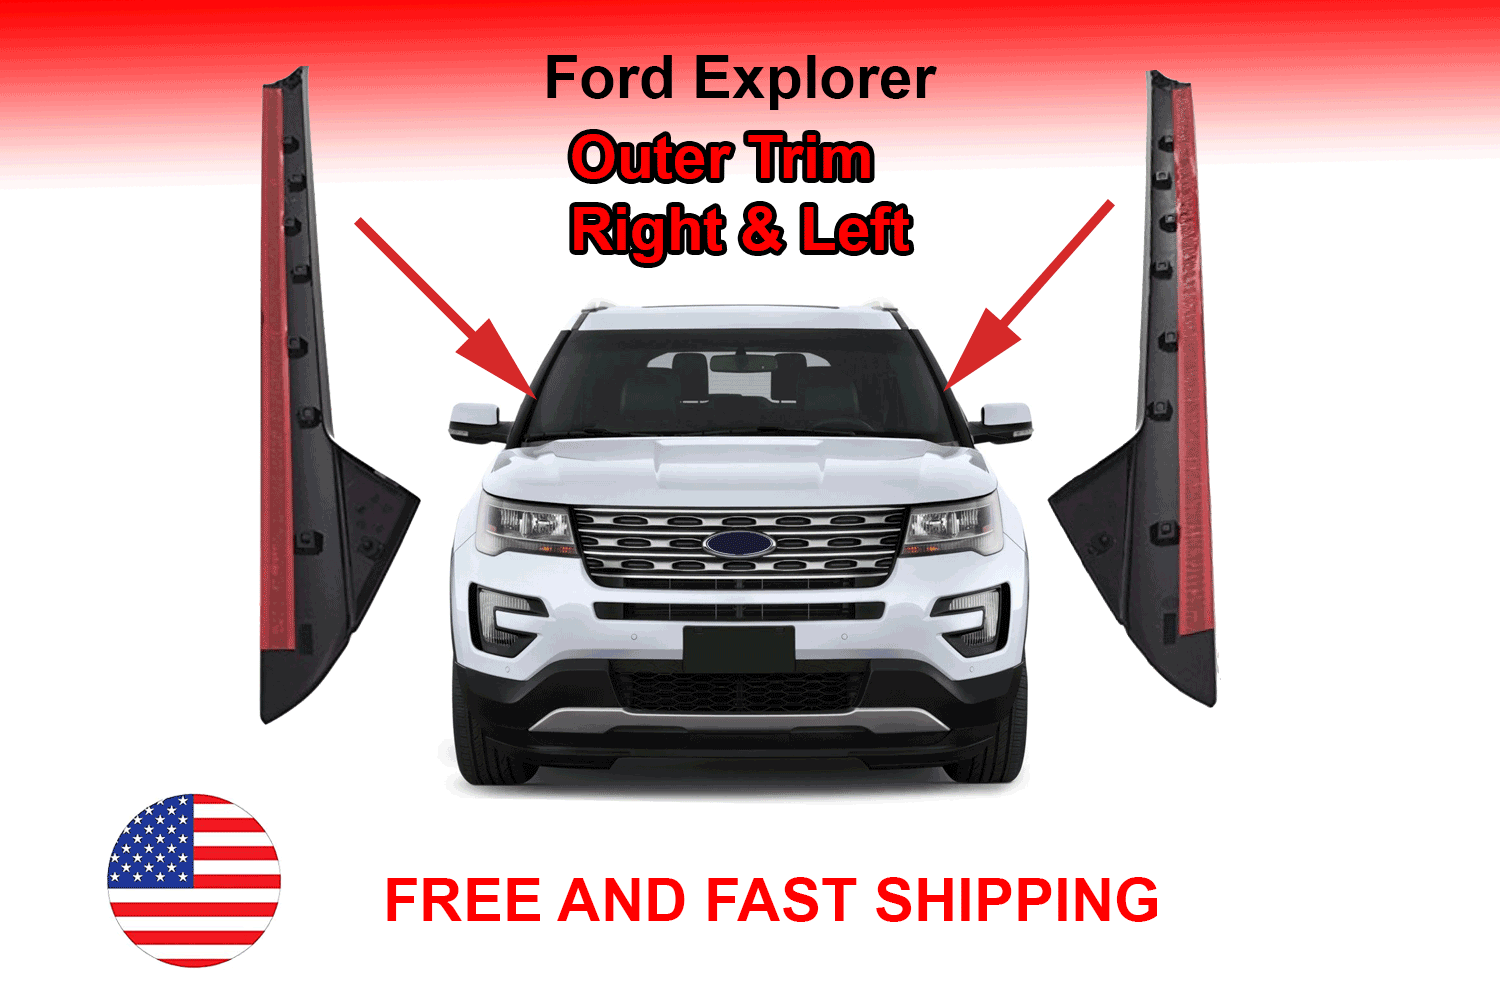 JAAGS 2011-2019 Ford Explorer Windshield molding Outer trim AND Inner Trim, Right & Left Side plus Clips DW1843 - JAAGS